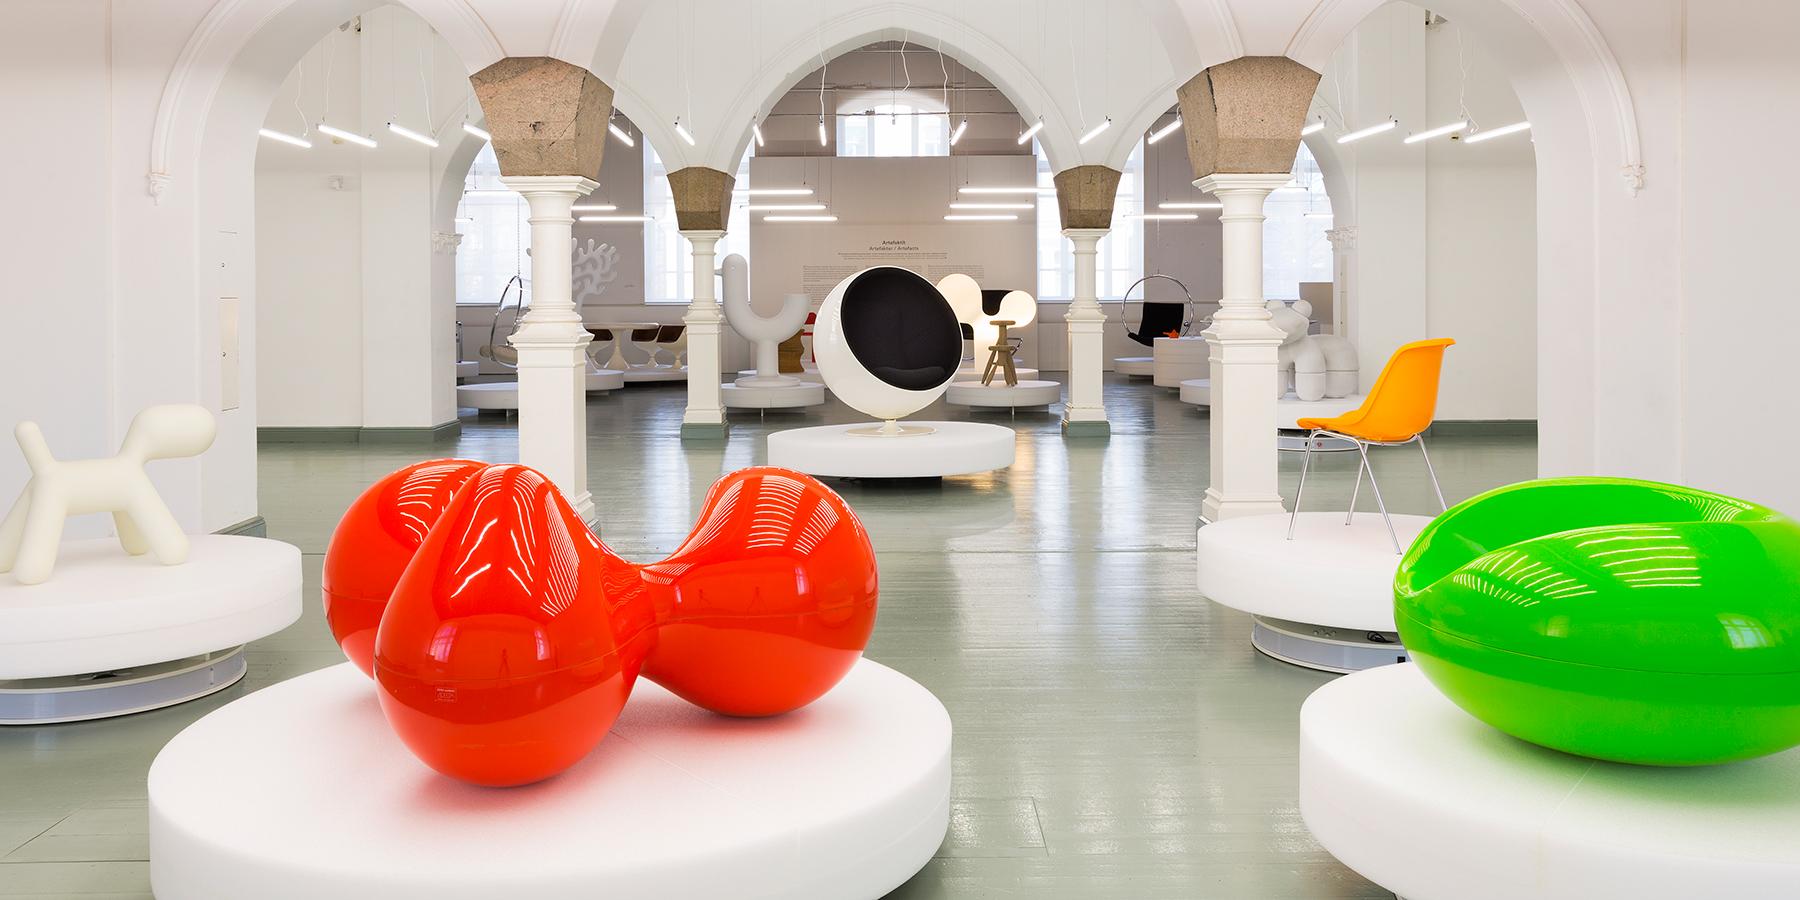 Eero has always been drawn to the circular form and is perhaps best known for his designs ‘without edges’. The Tomato chair combines three circles on a basic seat, with two as armrests, one stretched to be a comfortable back. It is made of